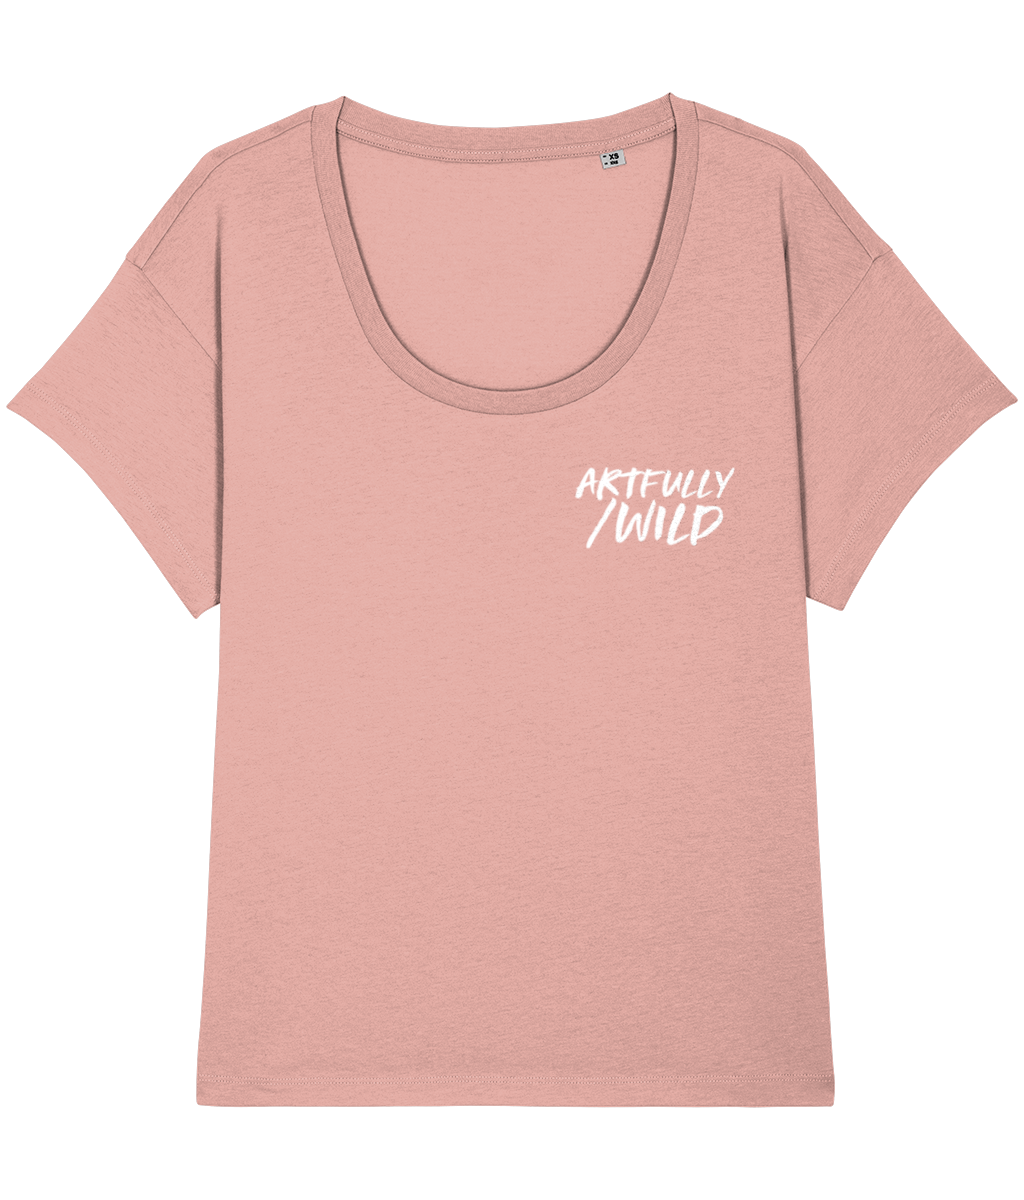 ‘ARTFULLY/WILD’ motif Women's Candy Pink Chiller T-Shirt. Eco-friendly organic cotton. White slogan print with water-based inks. Original Design by Artfully Wild.